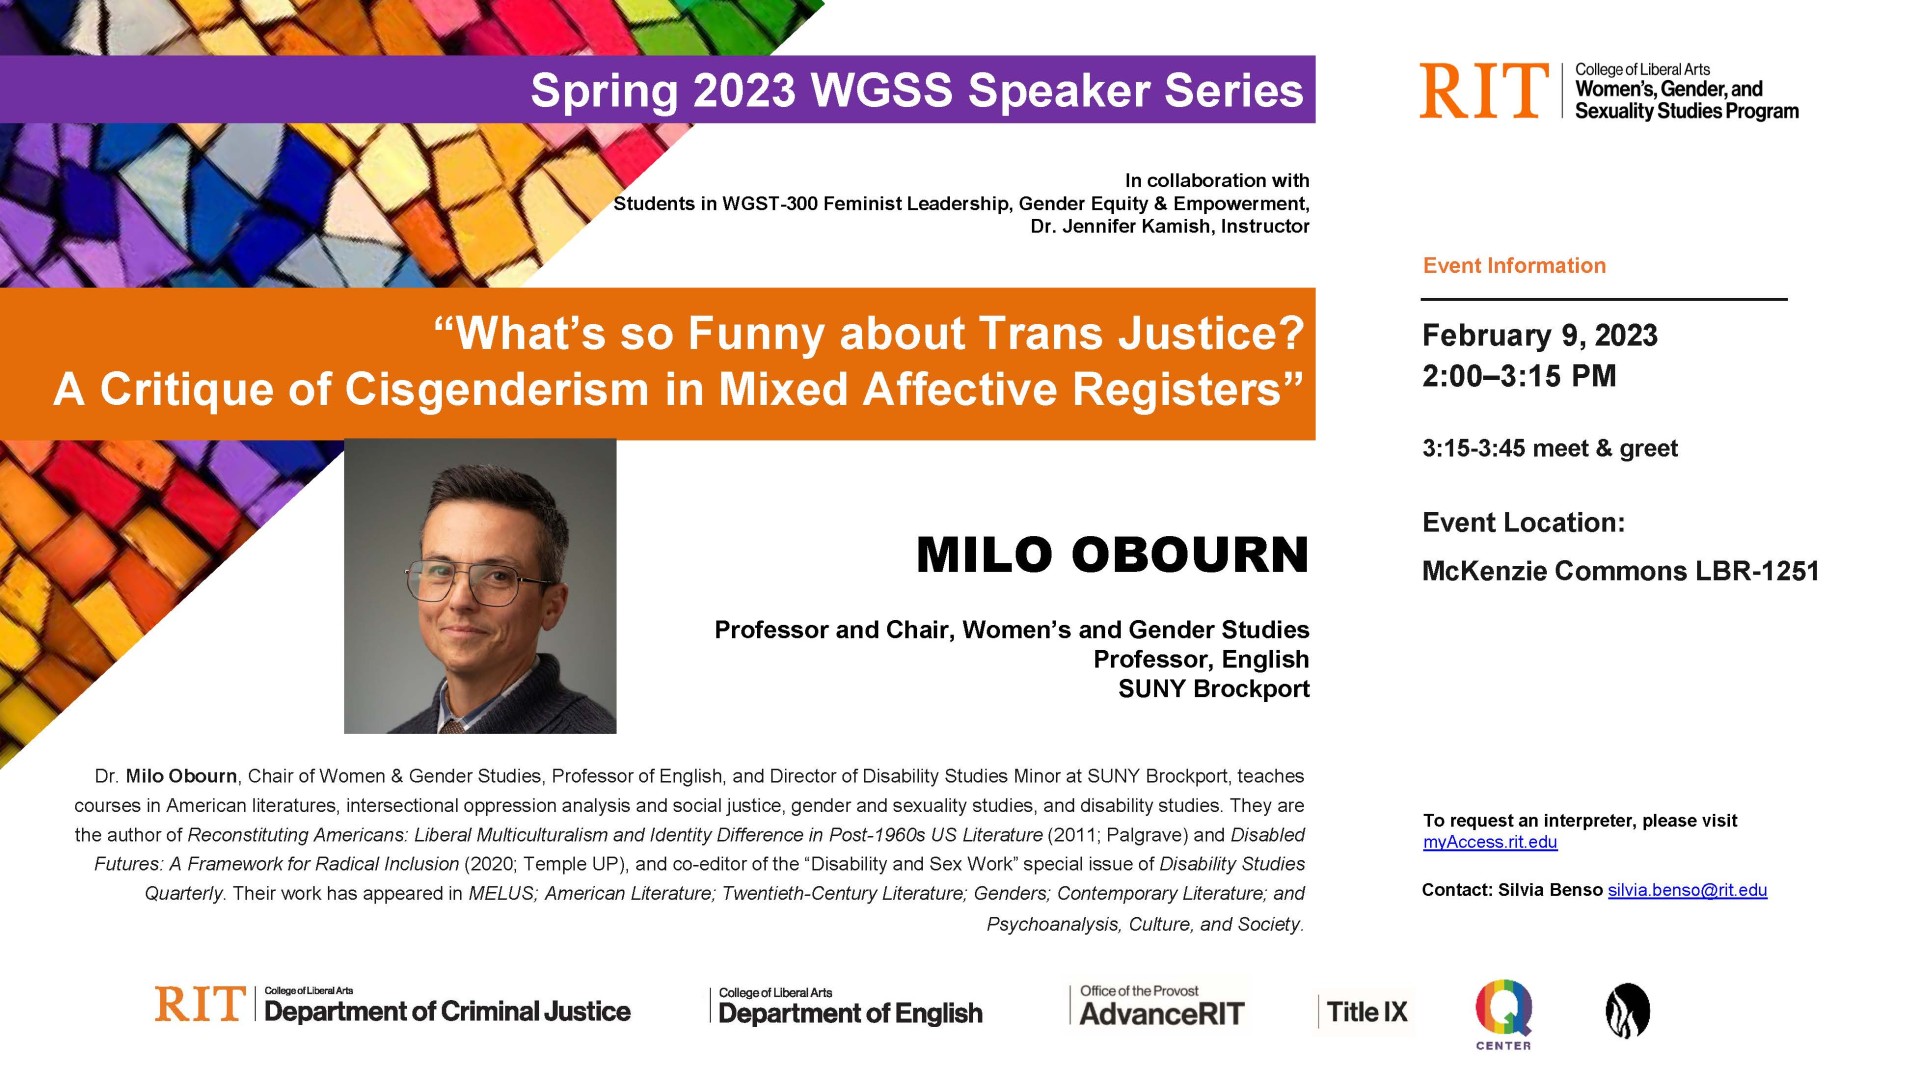 WGSS Speaker Series--Milo Obourn on "What is so Funny about Trans Justice?"